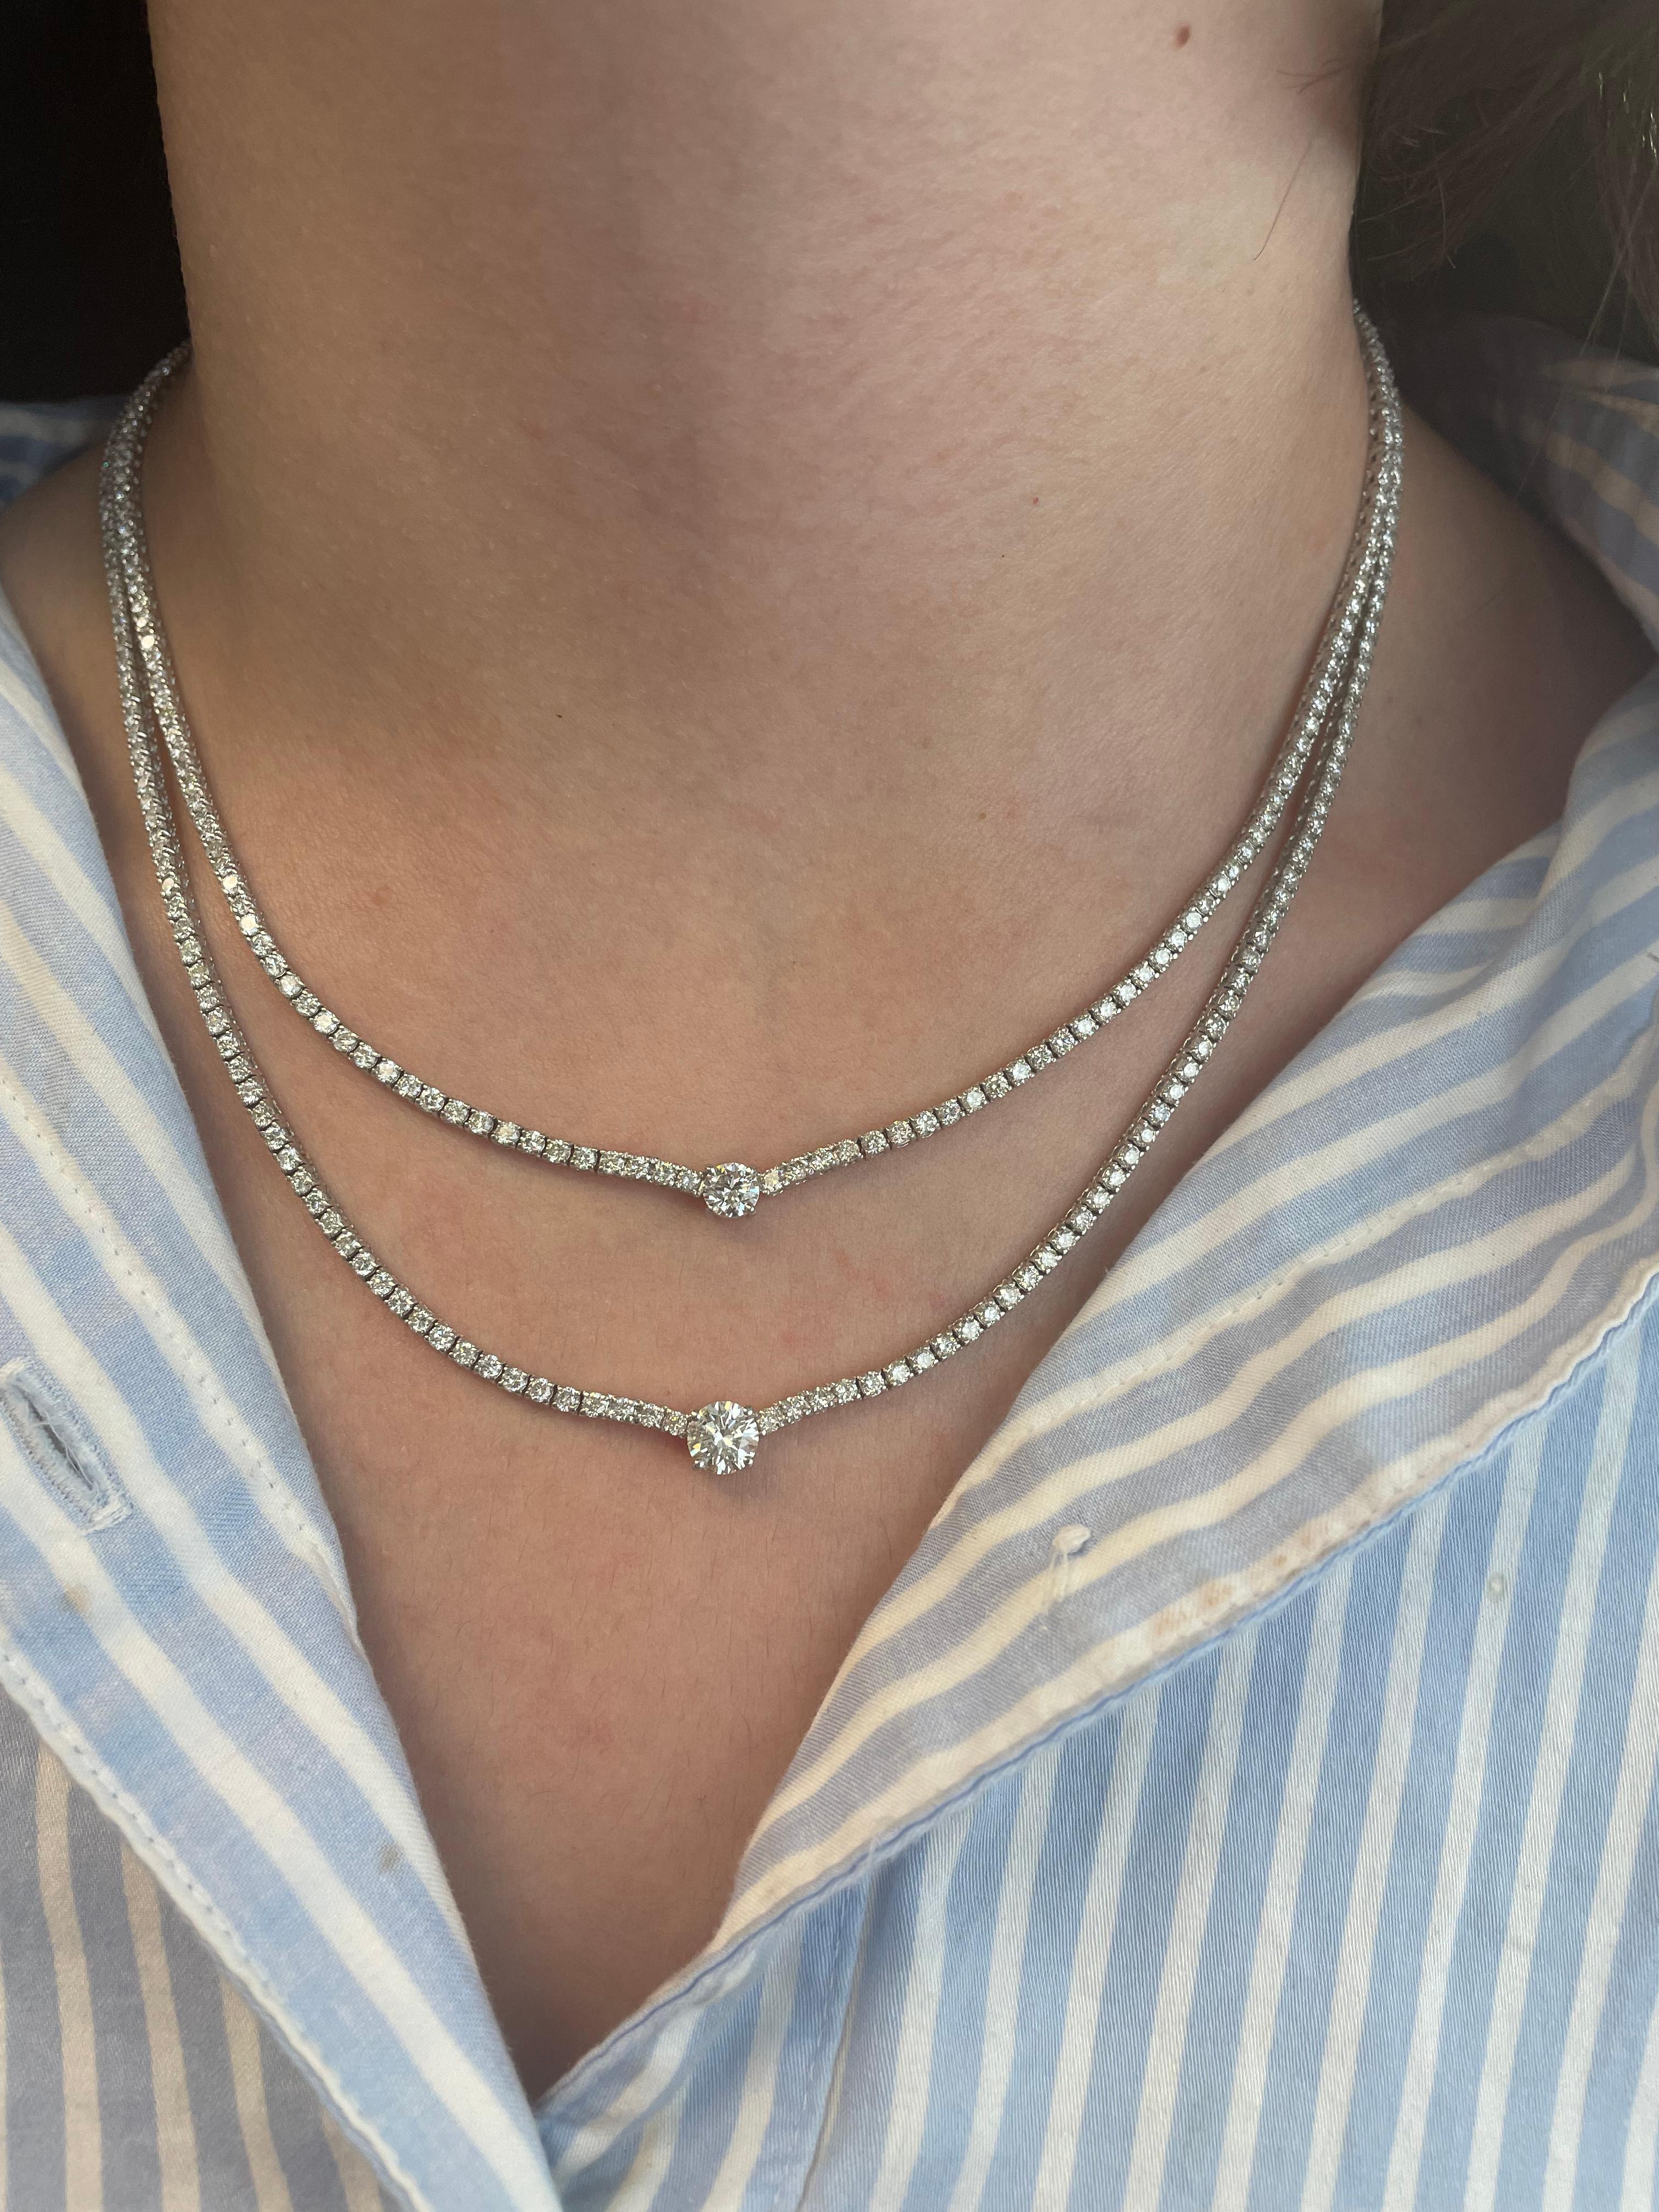 Exquisite double diamond tennis necklace with center diamond. High jewelry by Alexander Beverly Hills.
Top center round brilliant diamonds 0.47ct and bottom center diamond 0.84ct. Both approximately G/H color and VS clarity. Complimented with 12.17